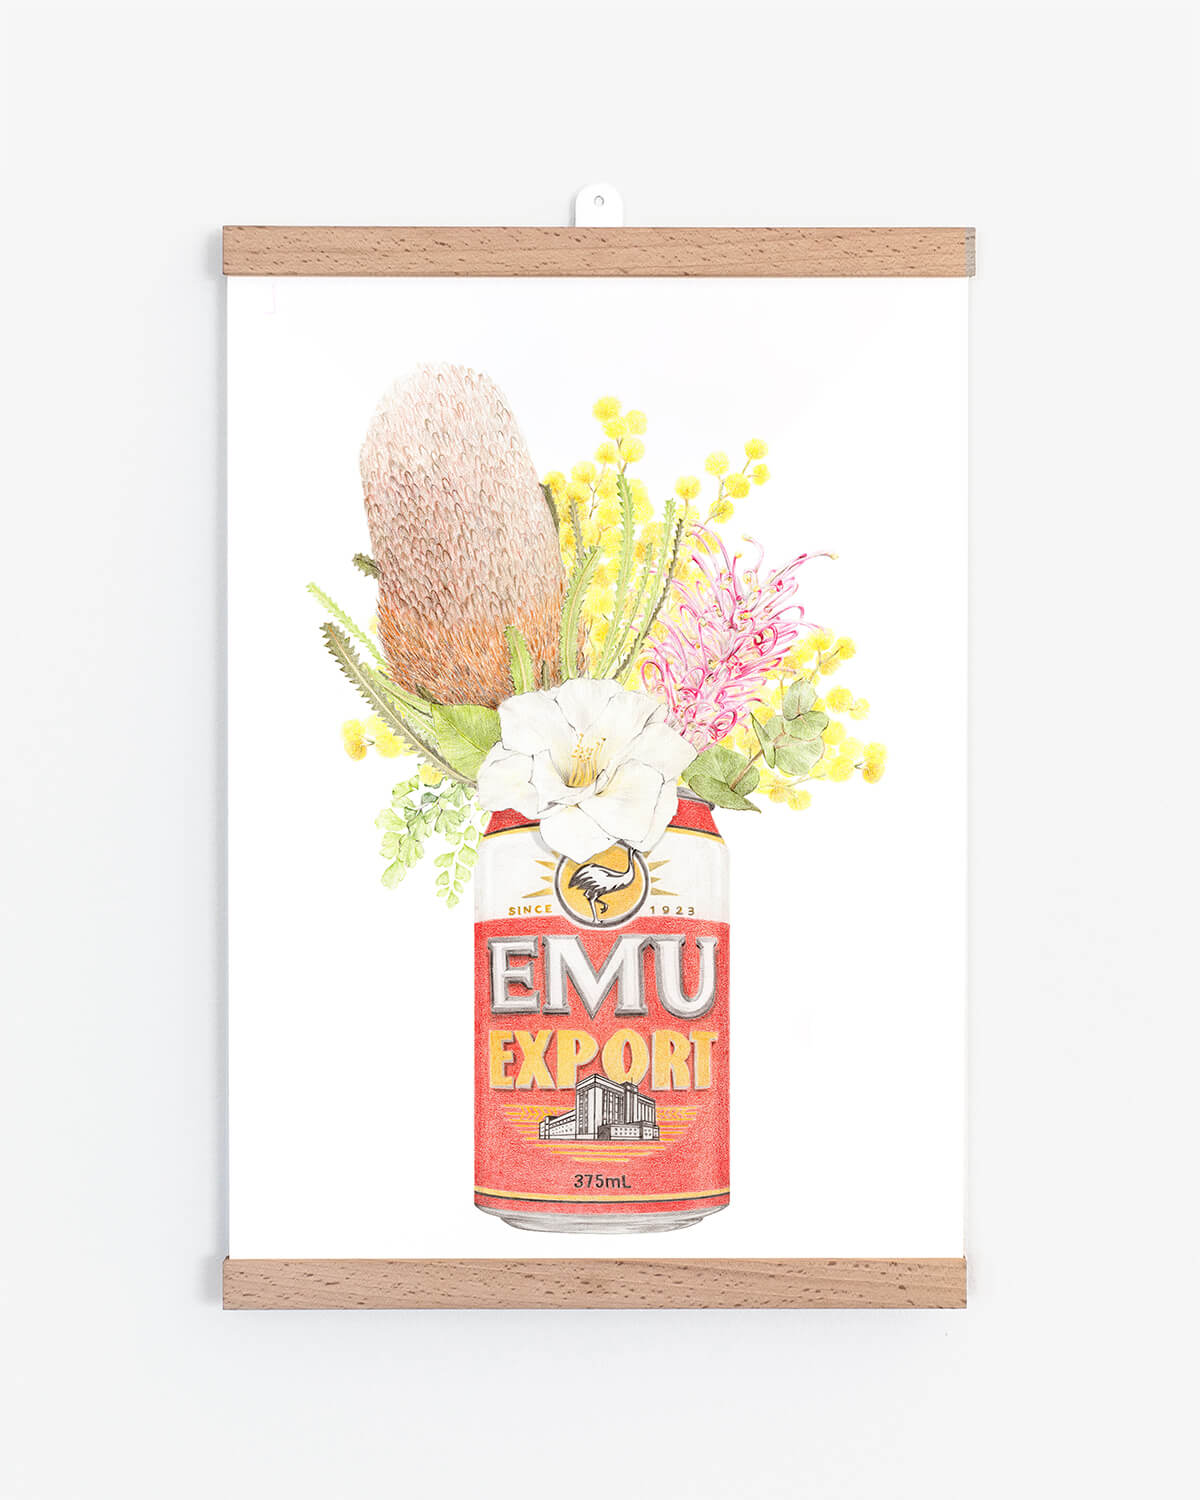  Iconic Aussie Artwork with Wattle and Banksia Flowers